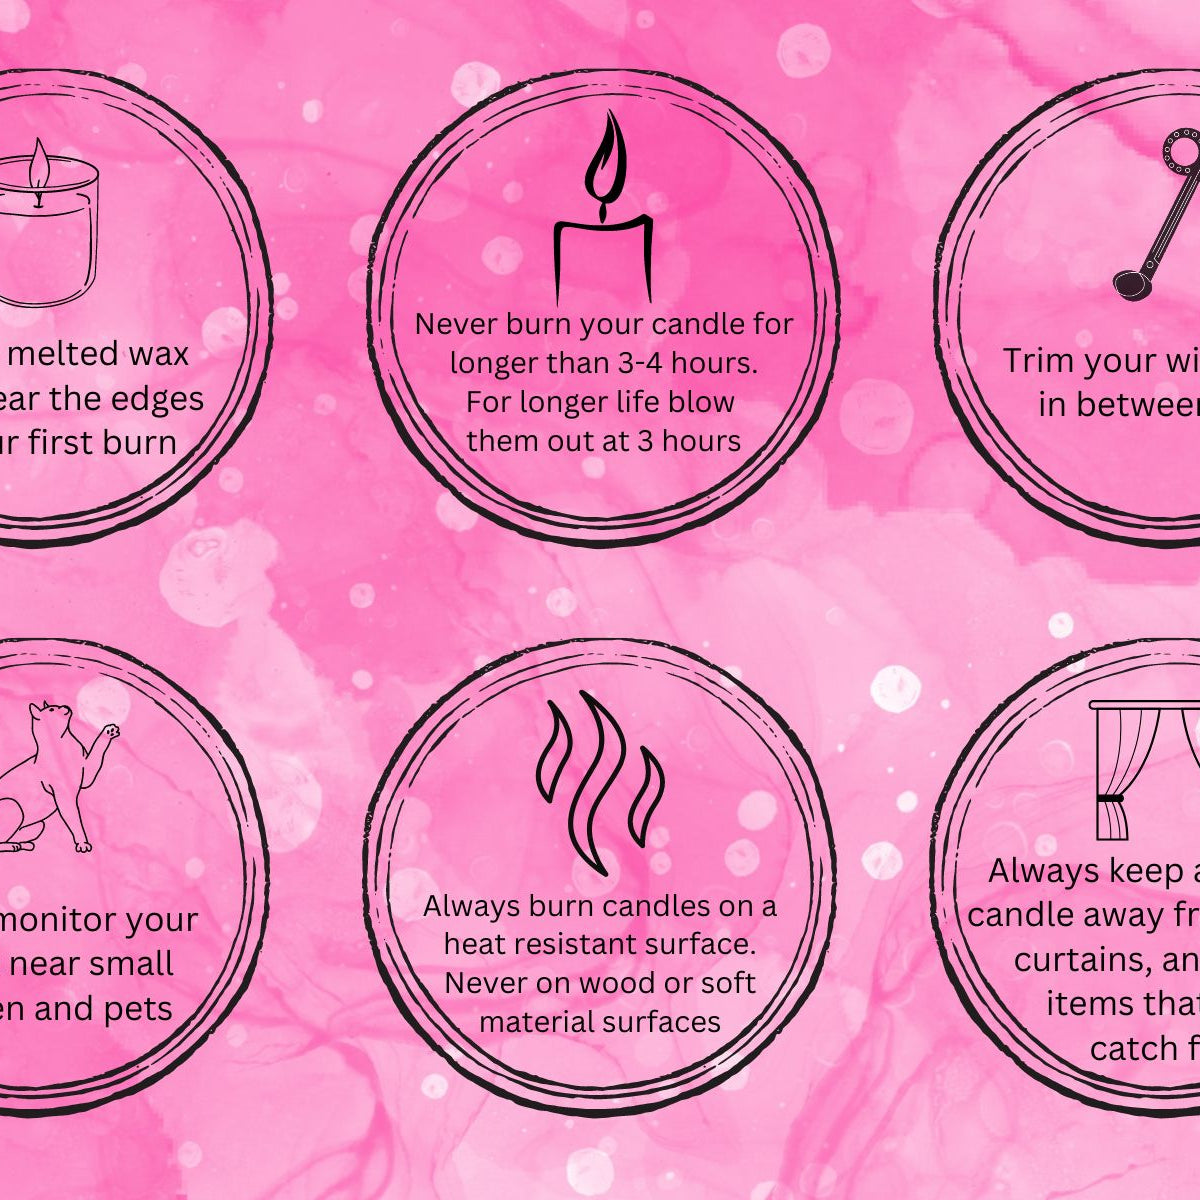 Printed Pink Candle Care Cards | 50